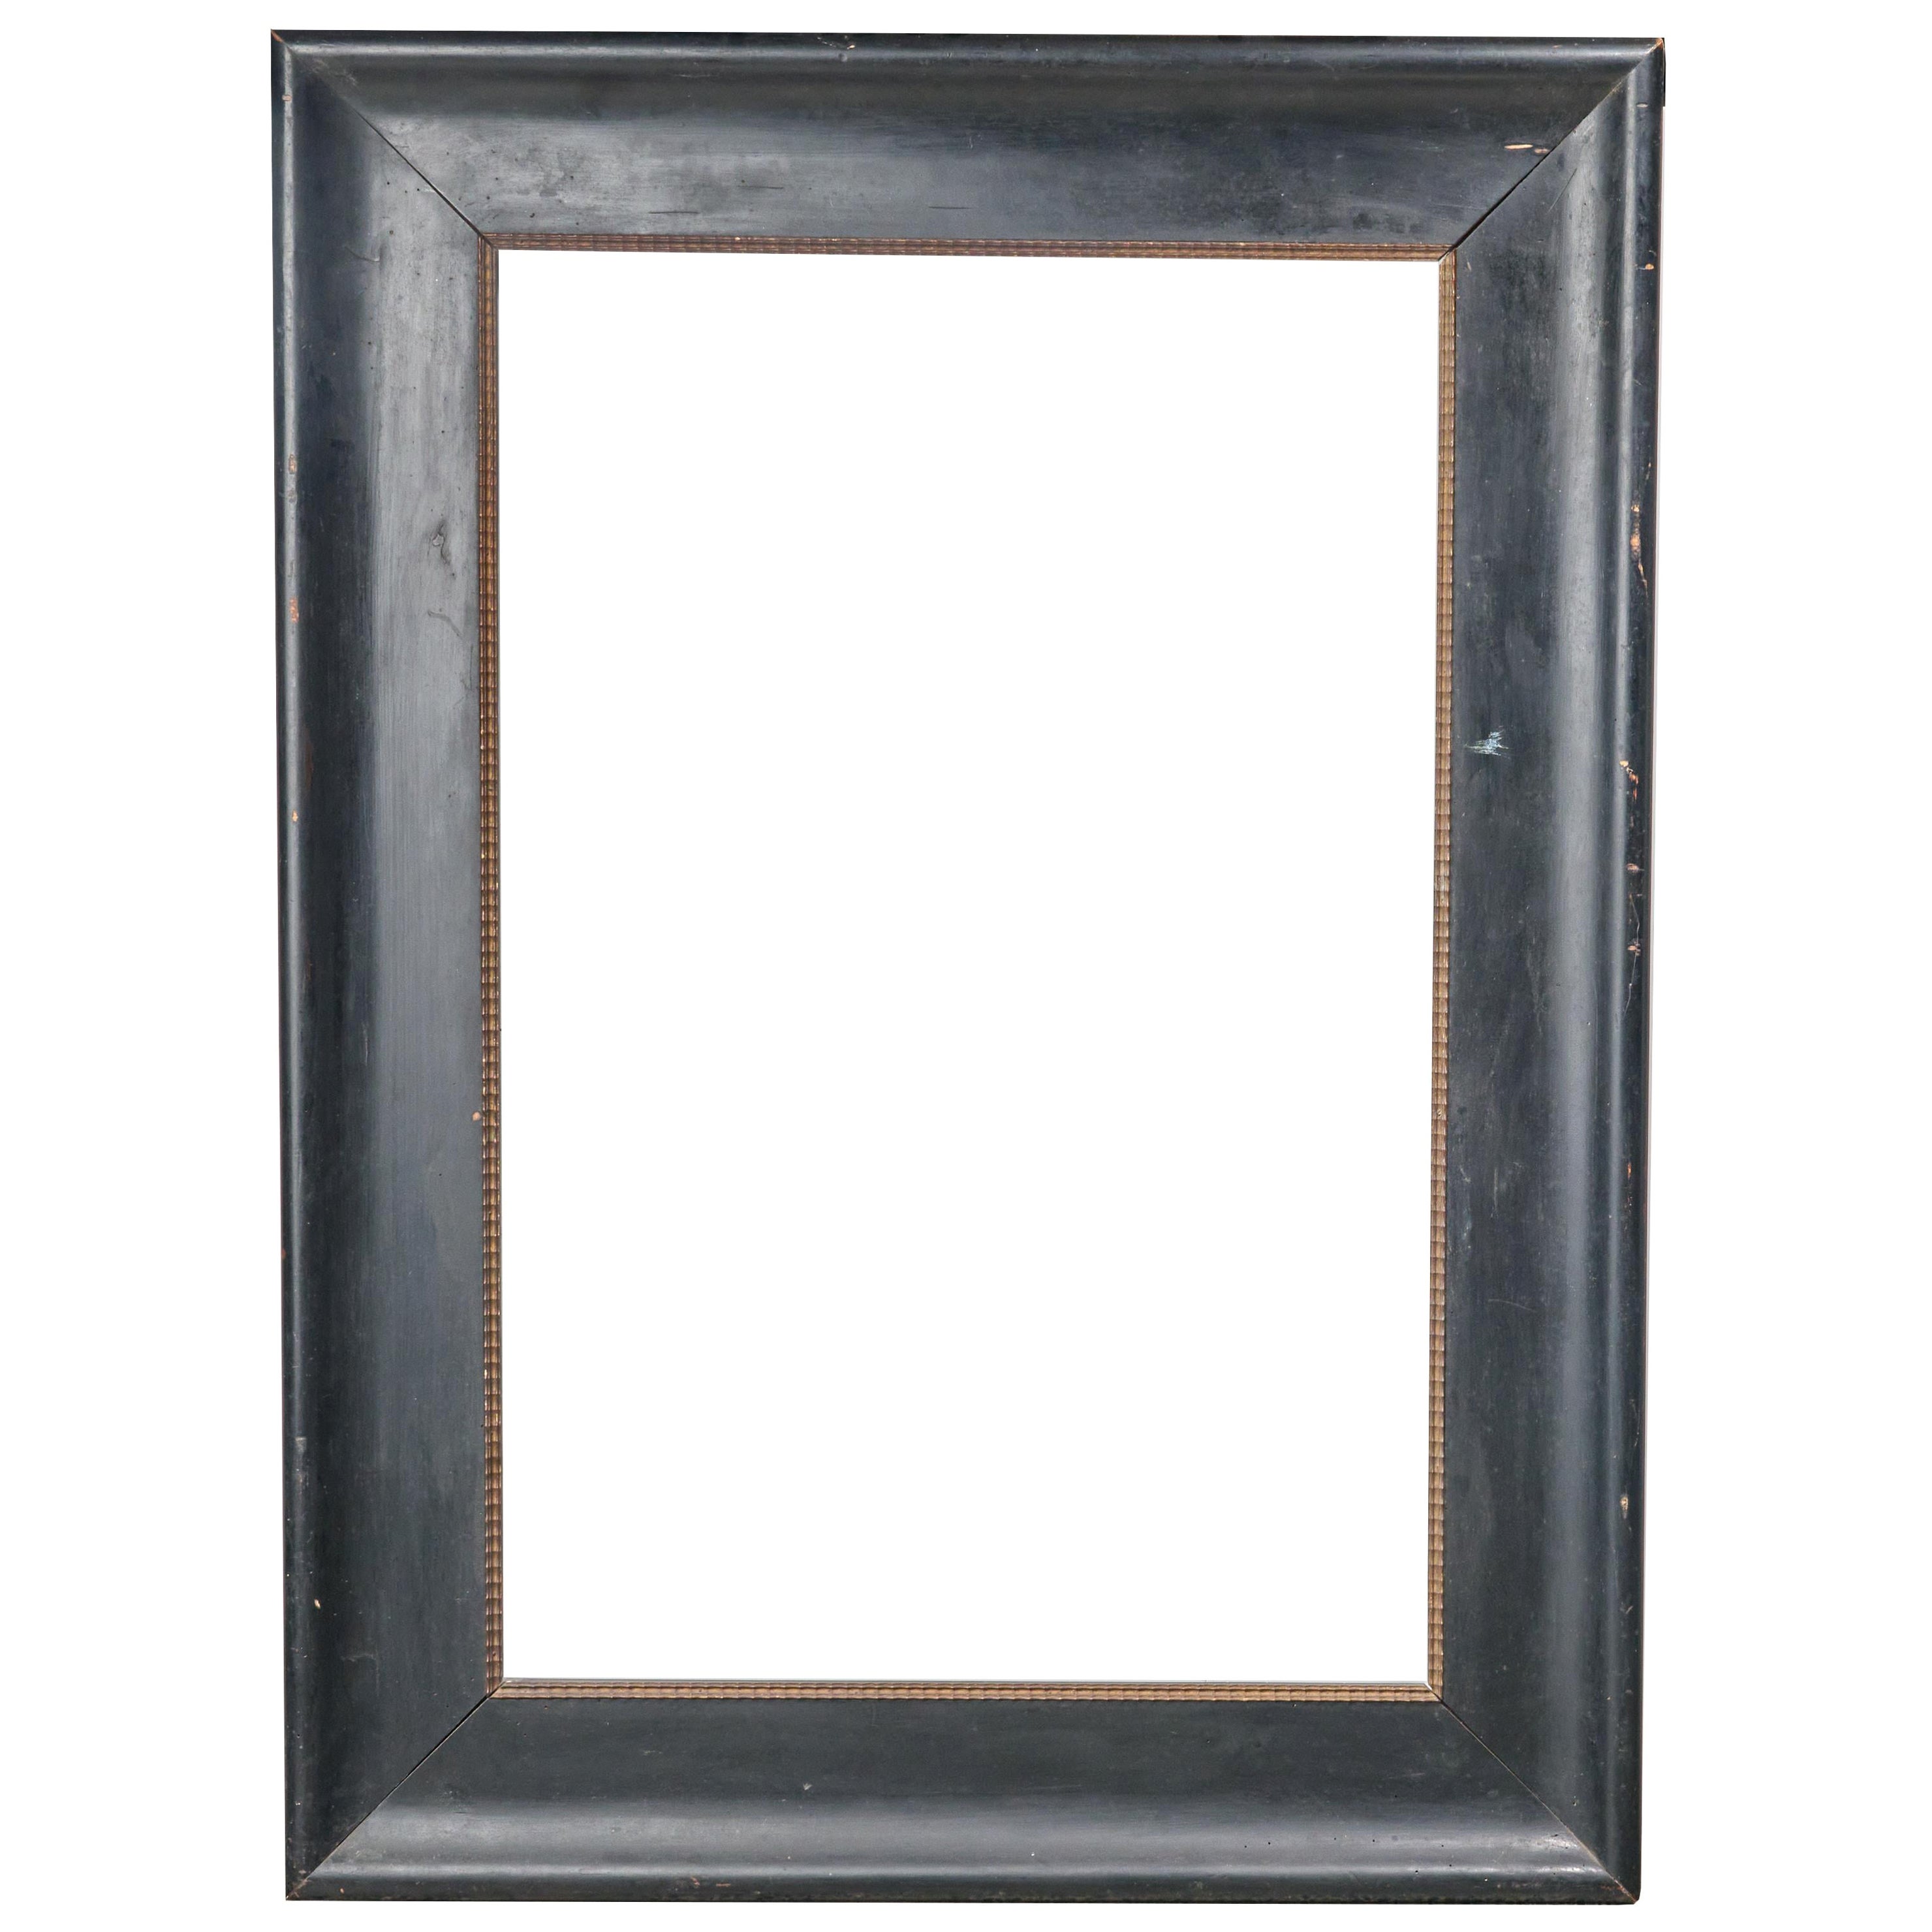 Black Frame with Simple Border and Original Wood